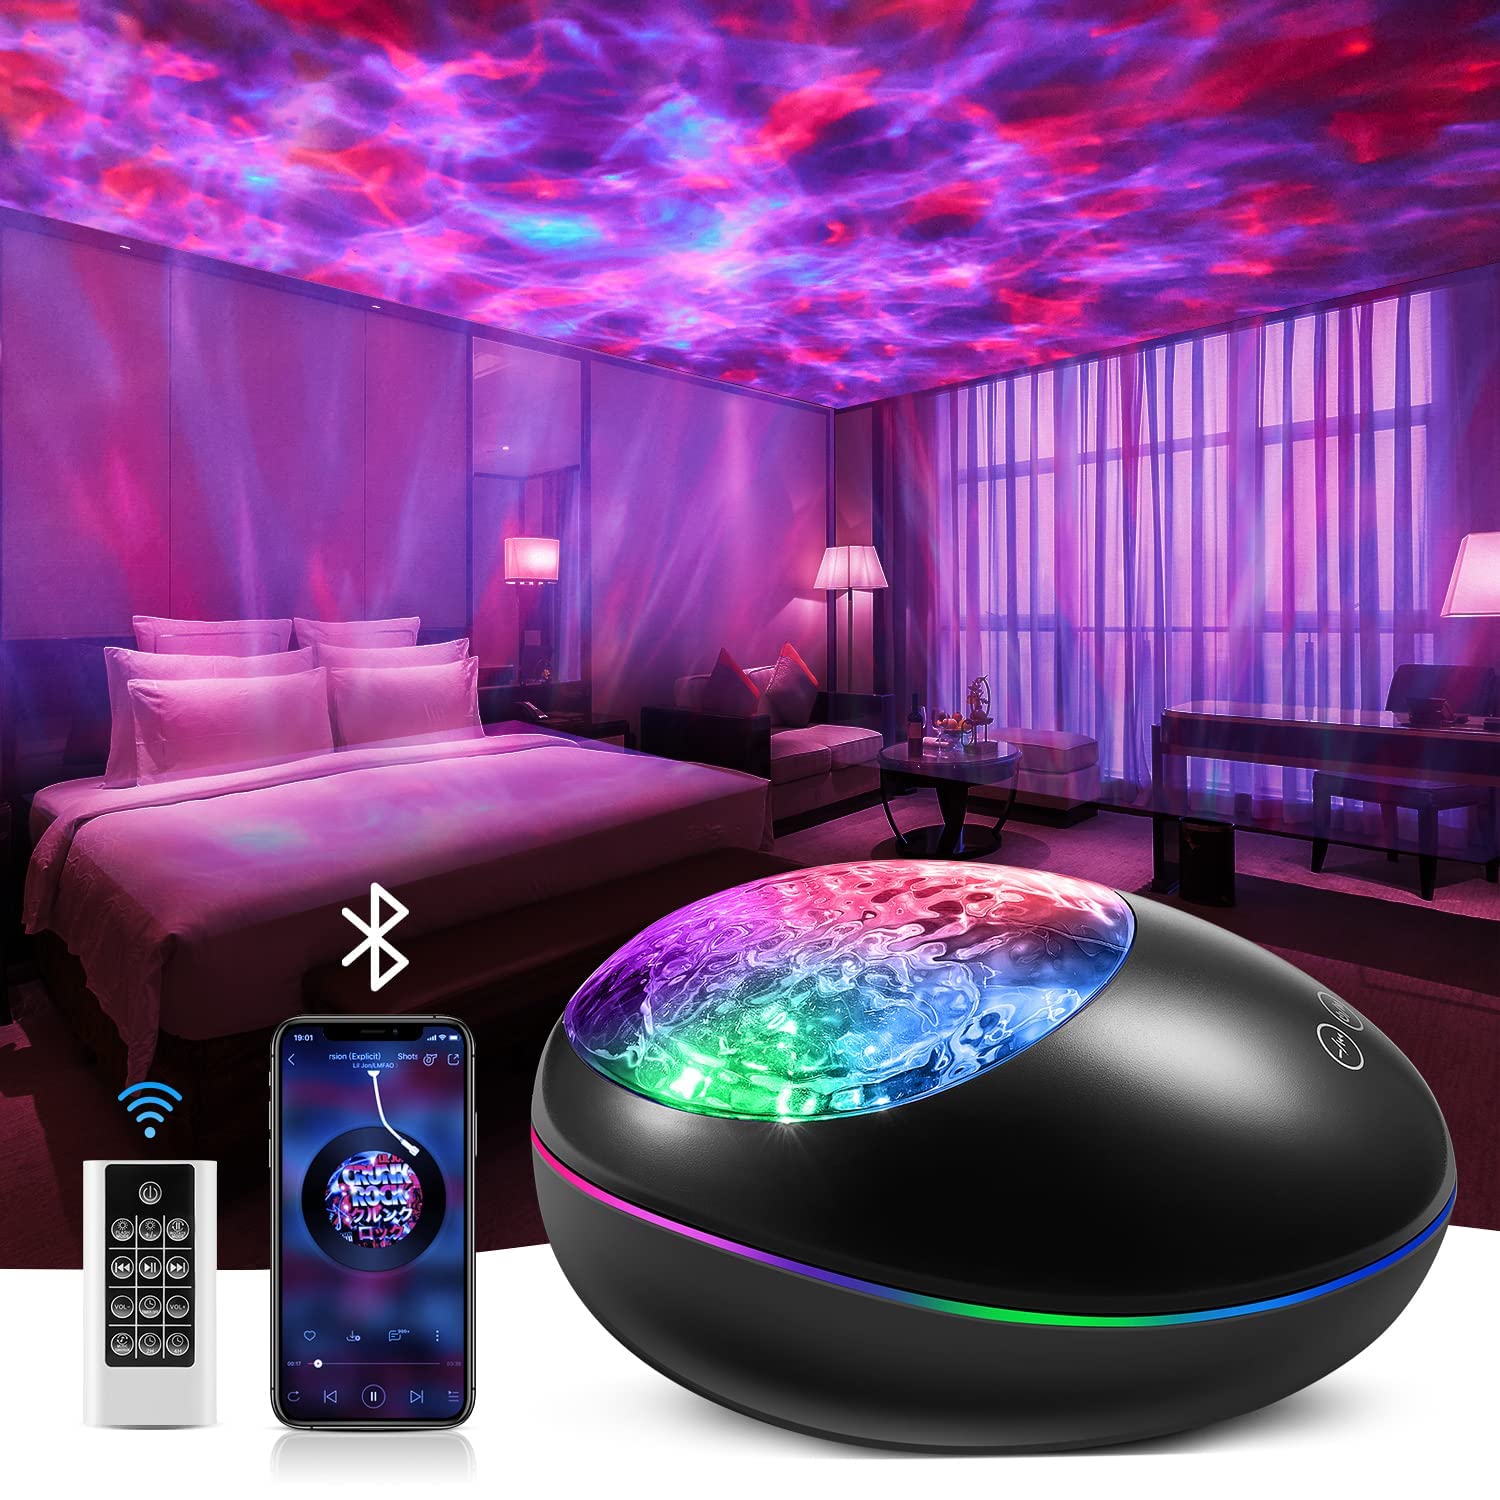 Mua One Fire Galaxy Projector for Bedroom, 8 White Noise Galaxy ...